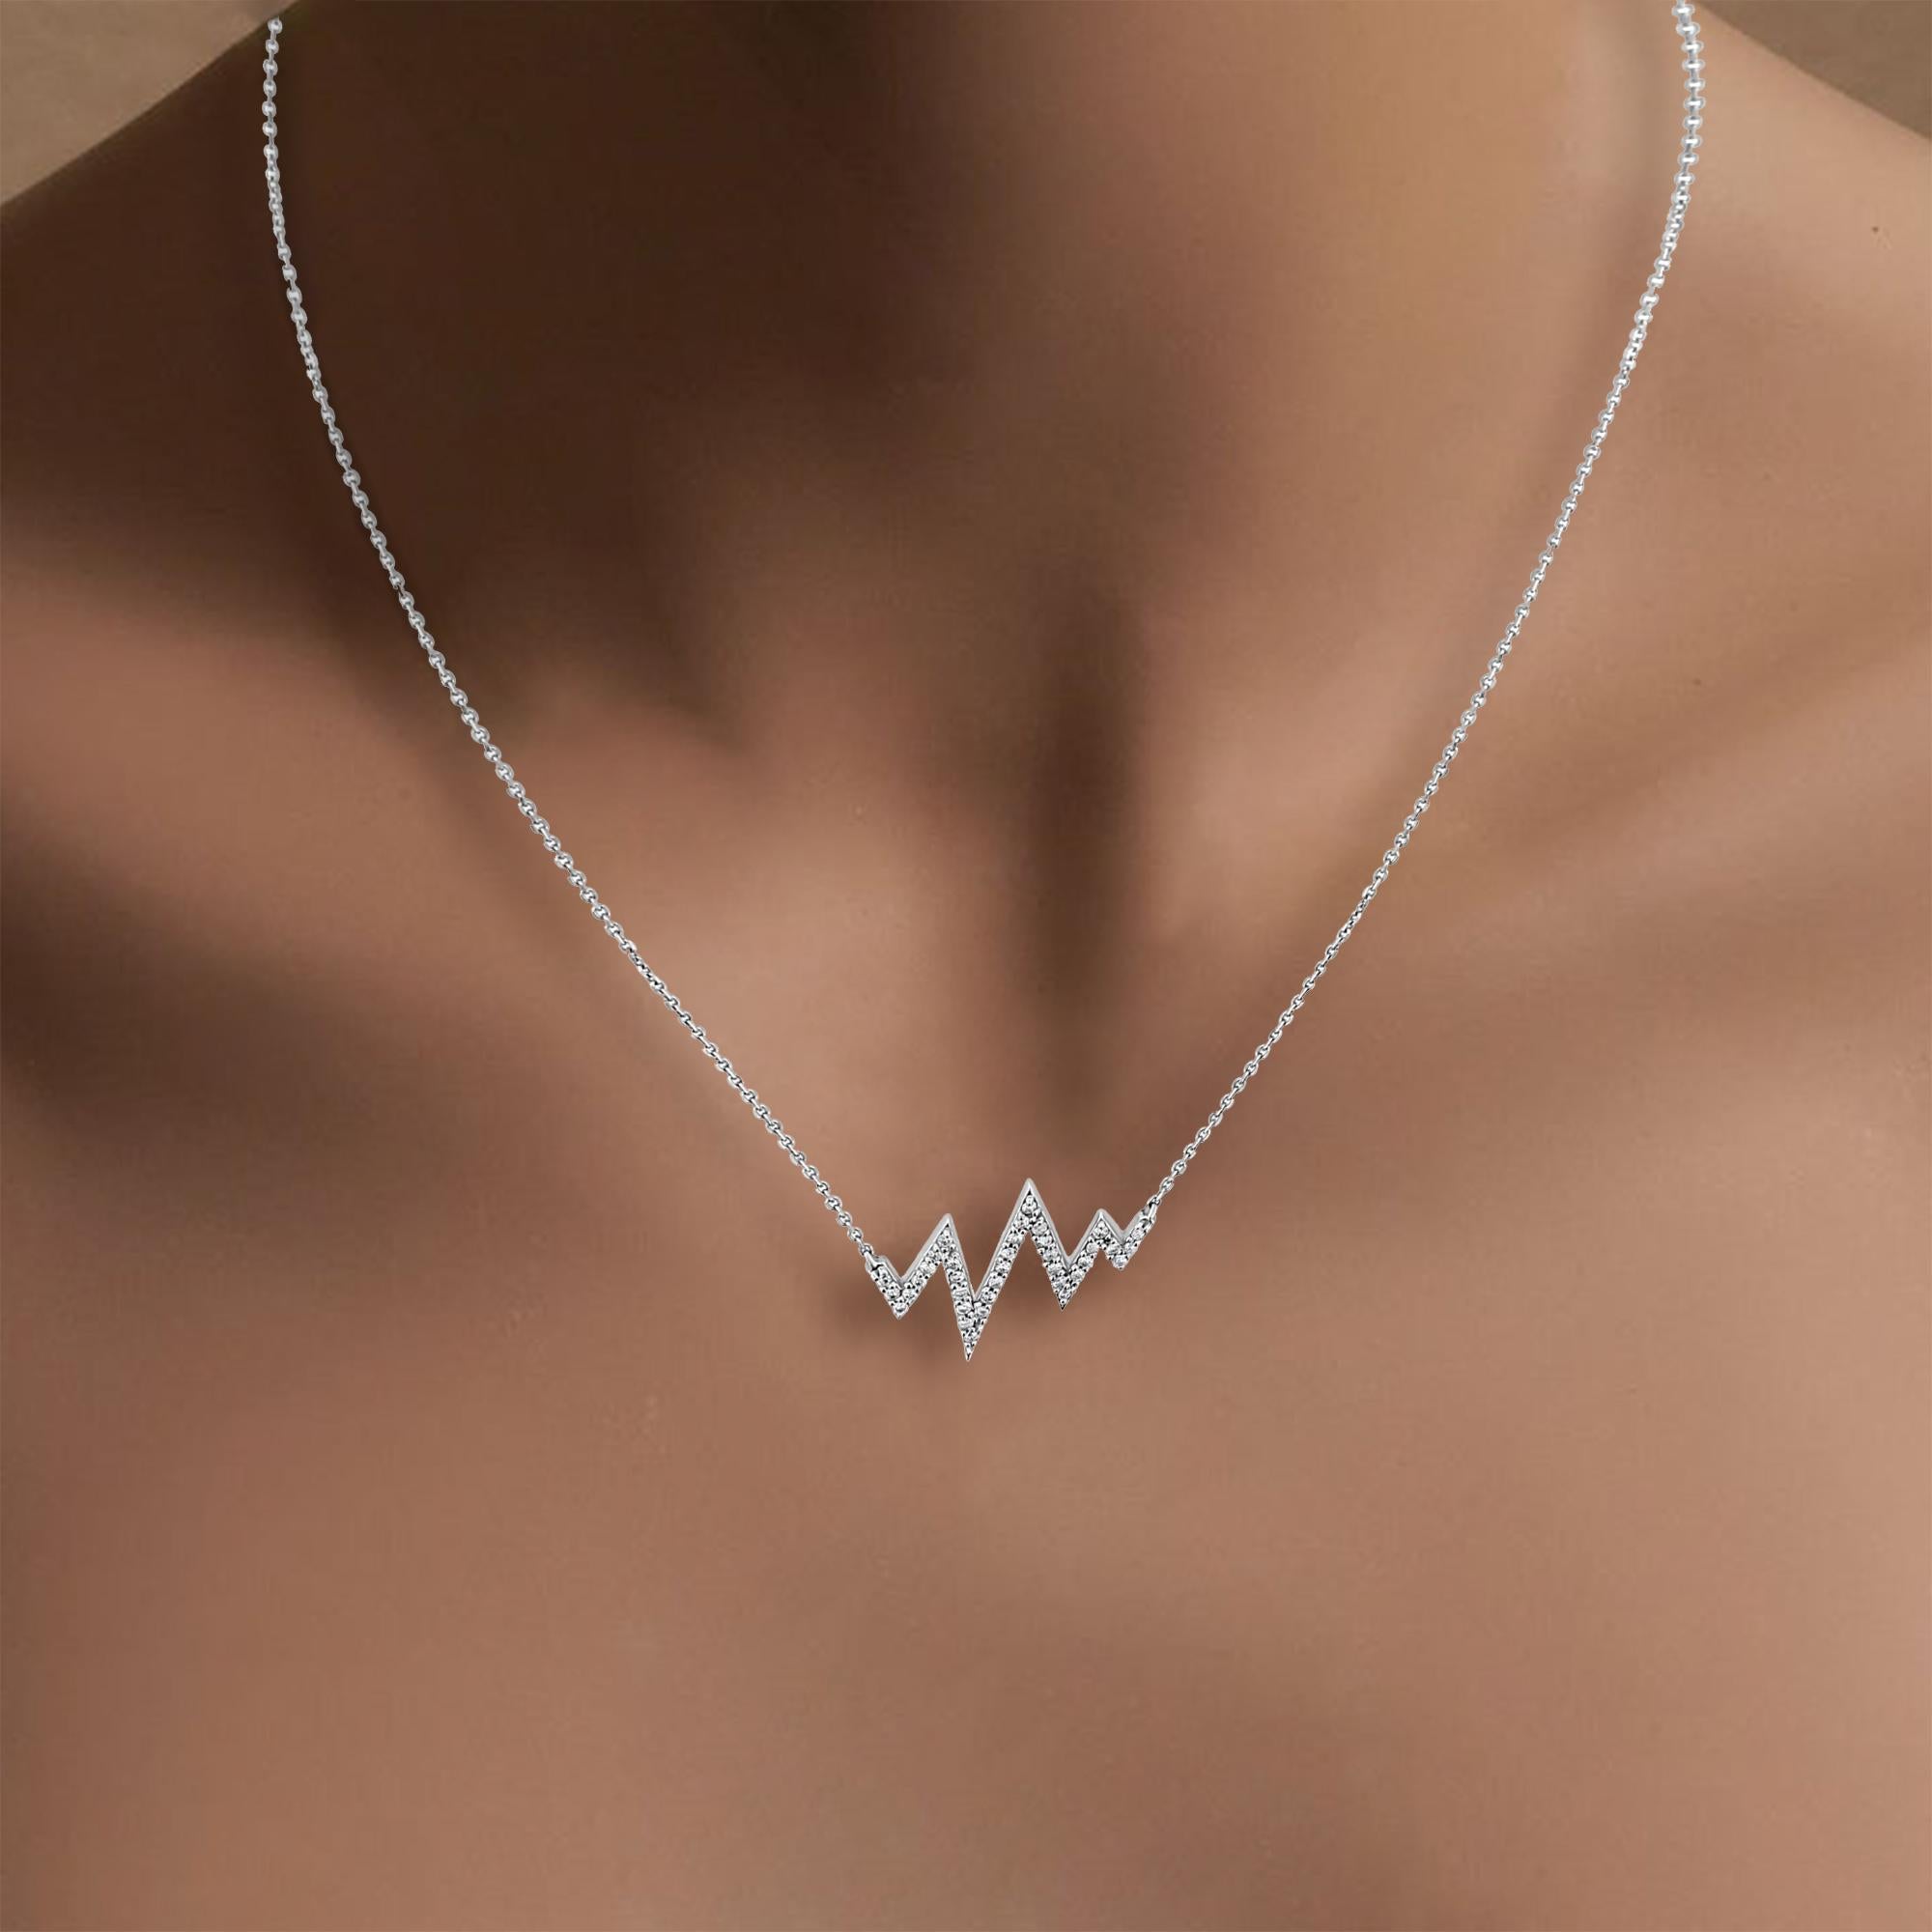 Round Cut Lightning Bolt or Heartbeat Diamond Statement Necklace .60cttw 14k White Gold For Sale